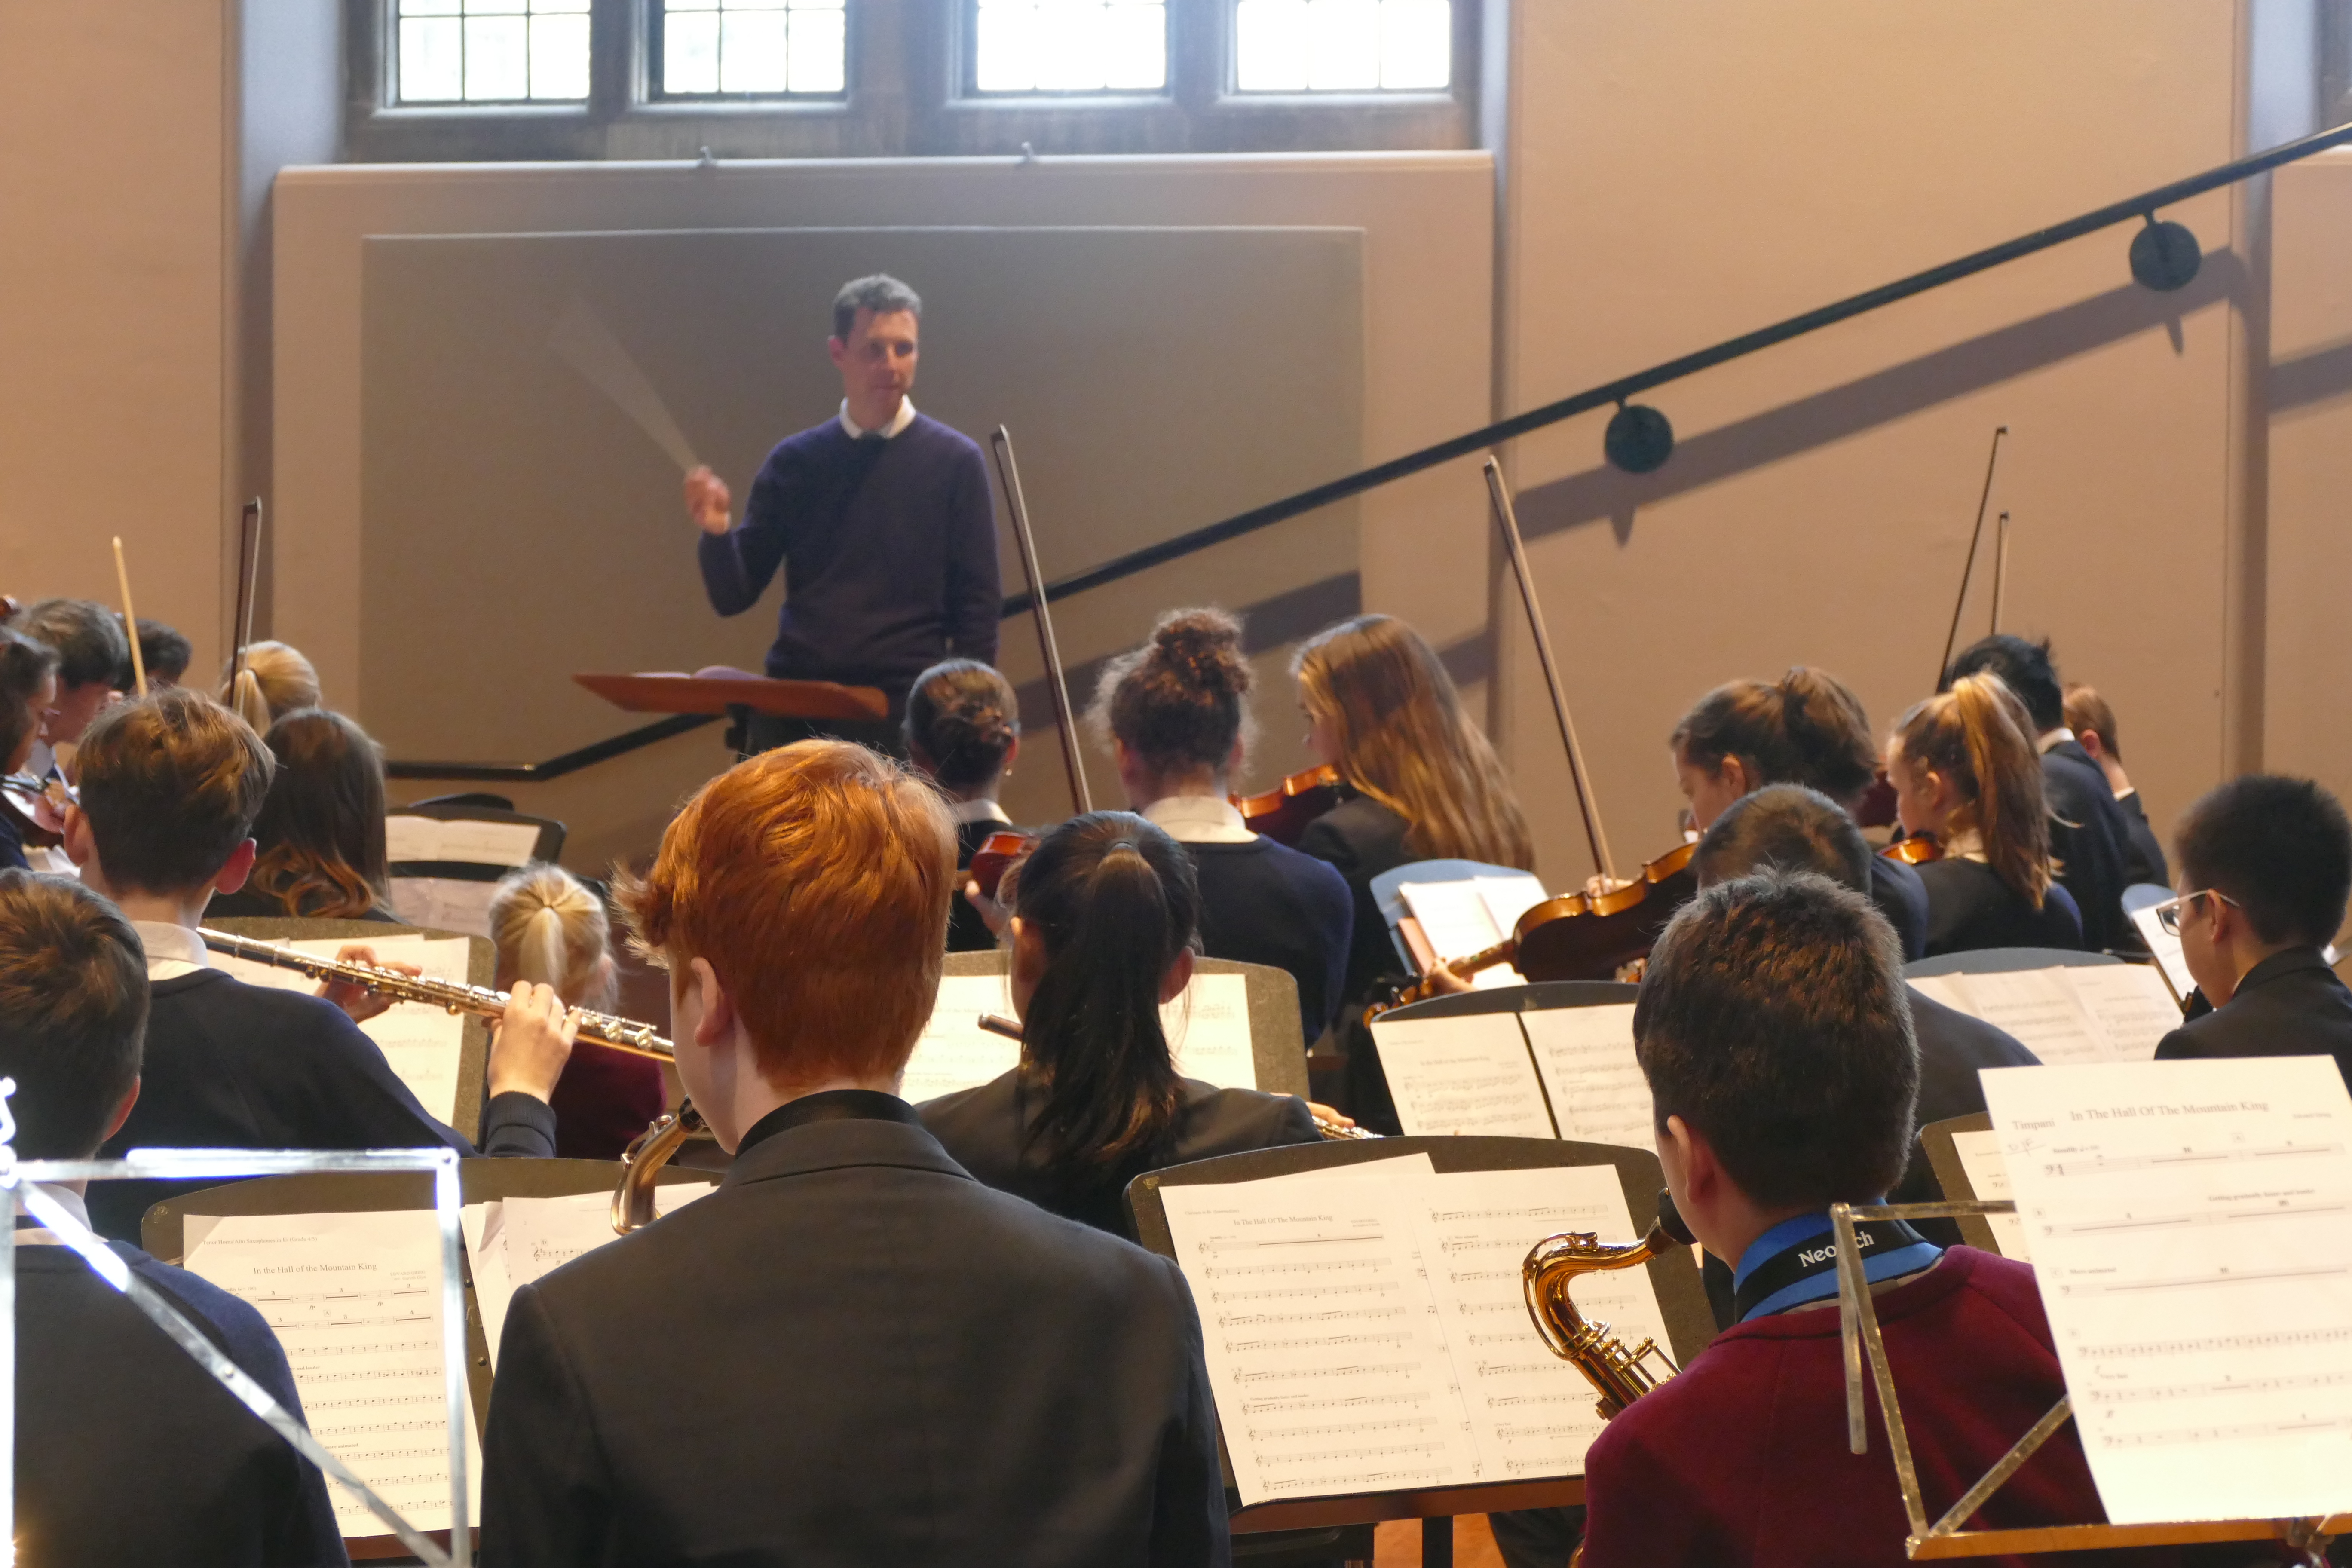 Orchestra in a Day - Workshop and Concert with Bromsgrove and Winterfold, February 2019